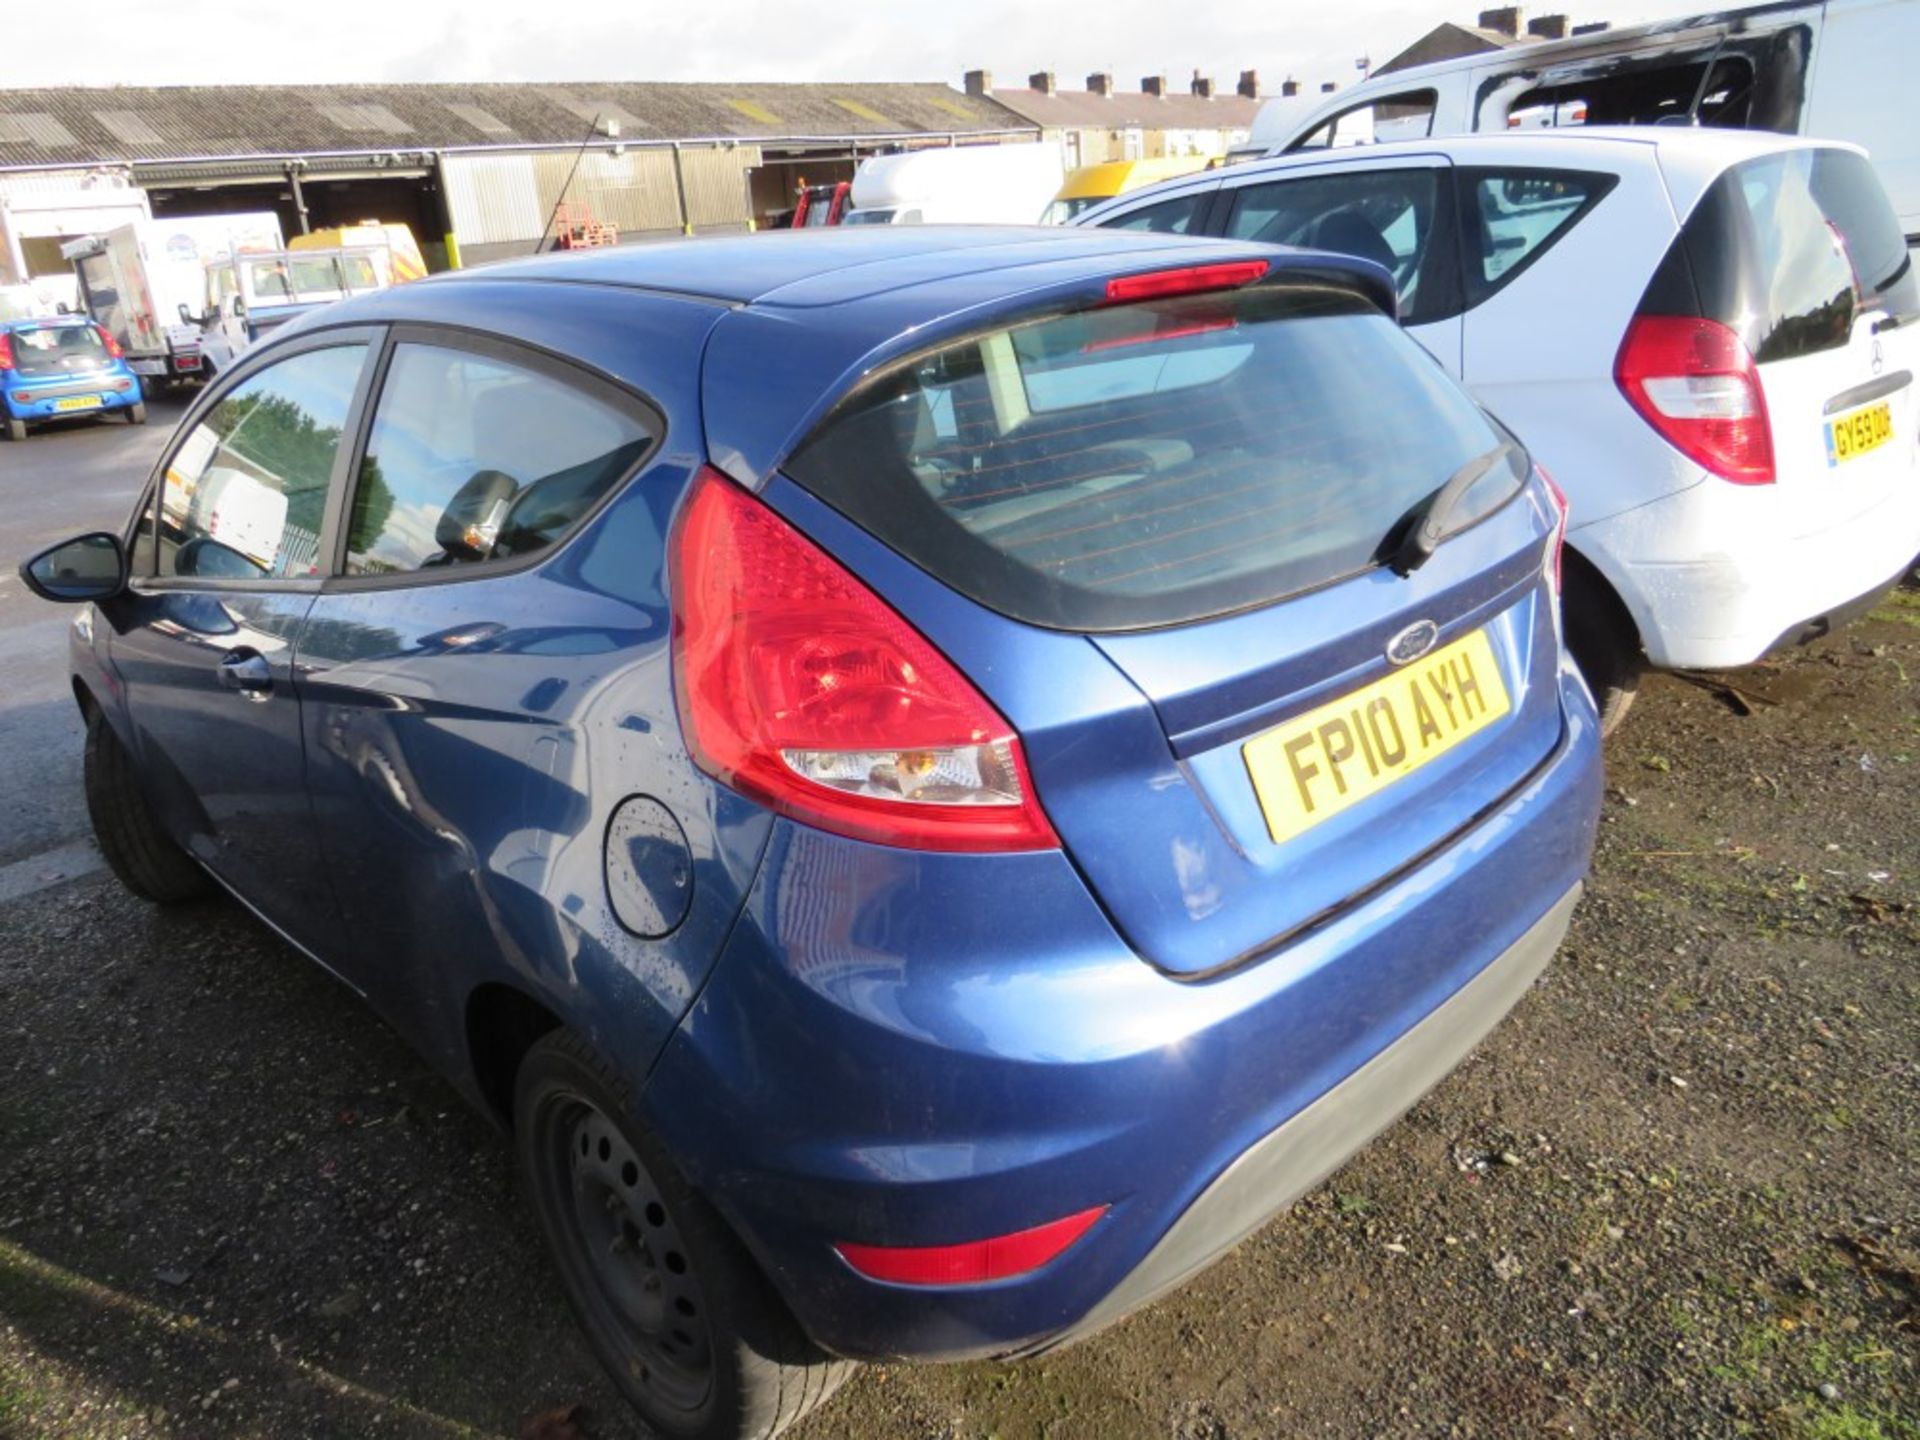 10 reg FORD FIESTA EDGE TDCI 68 3 DOOR HATCHBACK (ACCIDENT DAMAGED, RUNS BUT NOT FIT TO DRIVE) ( - Image 3 of 6